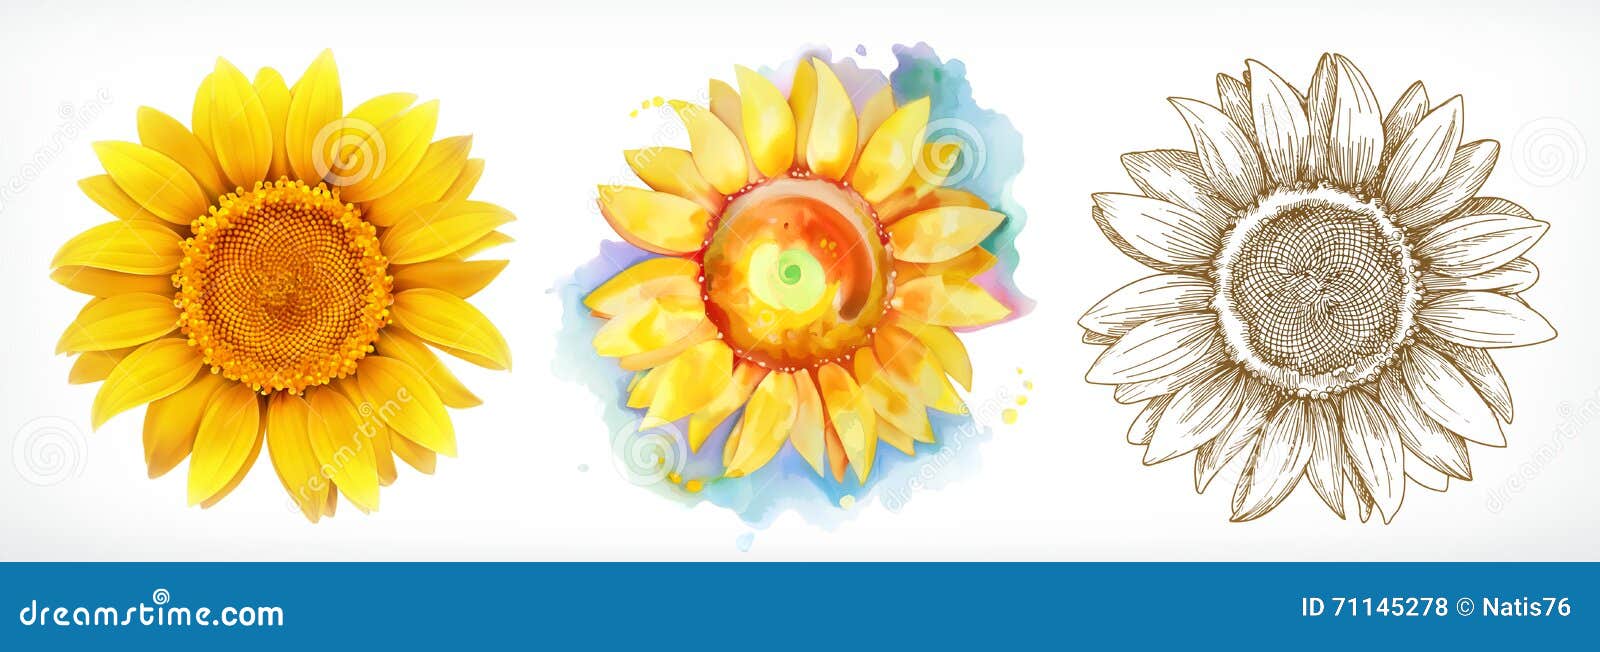 sunflower, different styles,  drawing, icon set